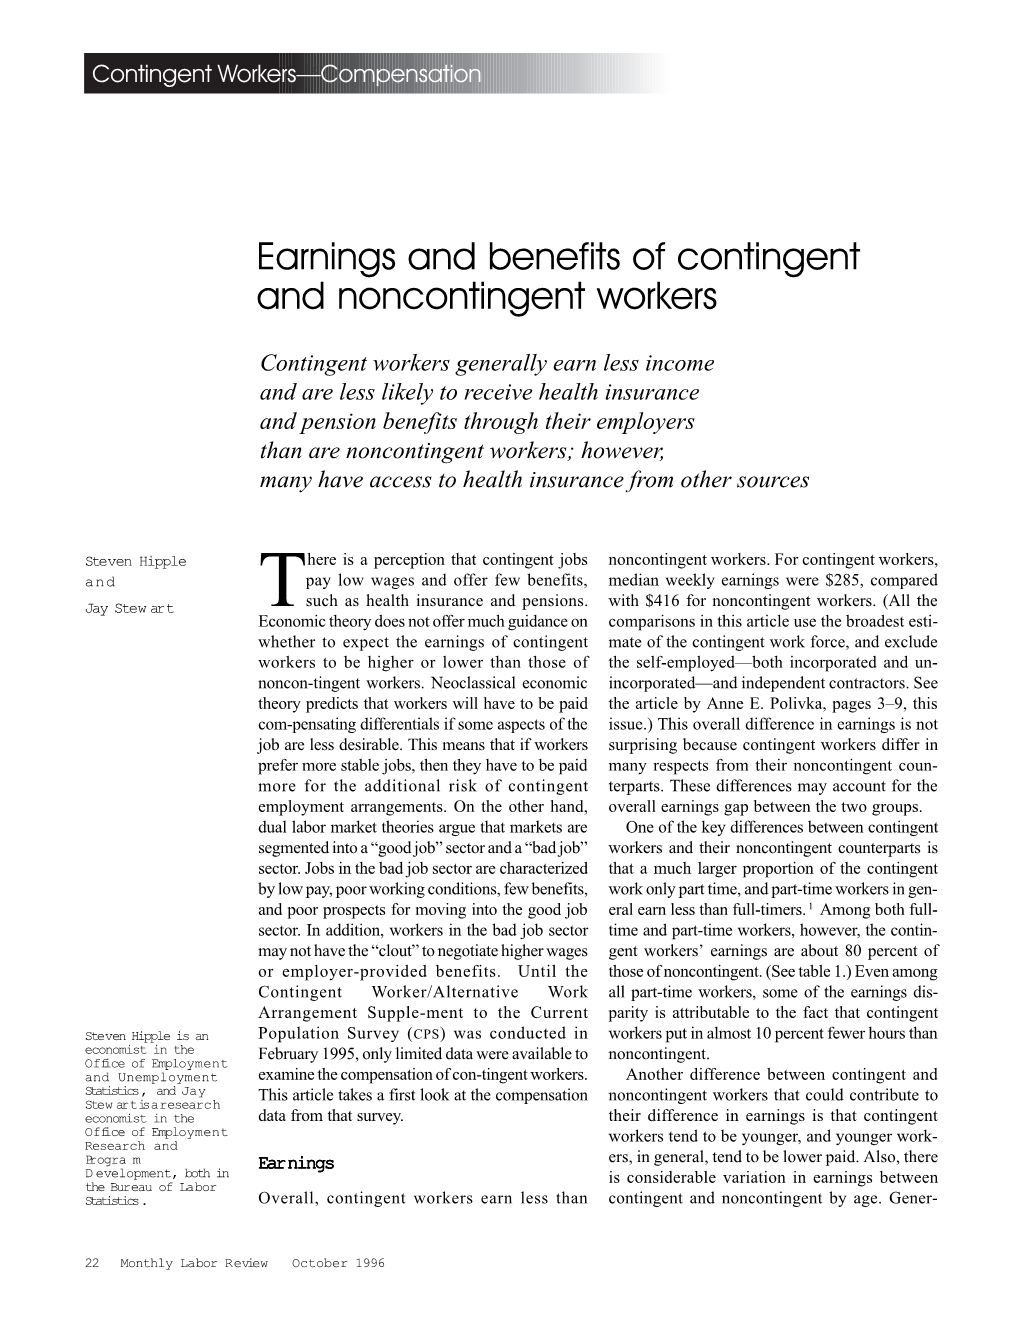 Earnings and Benefits of Contingent and Noncontingent Workers